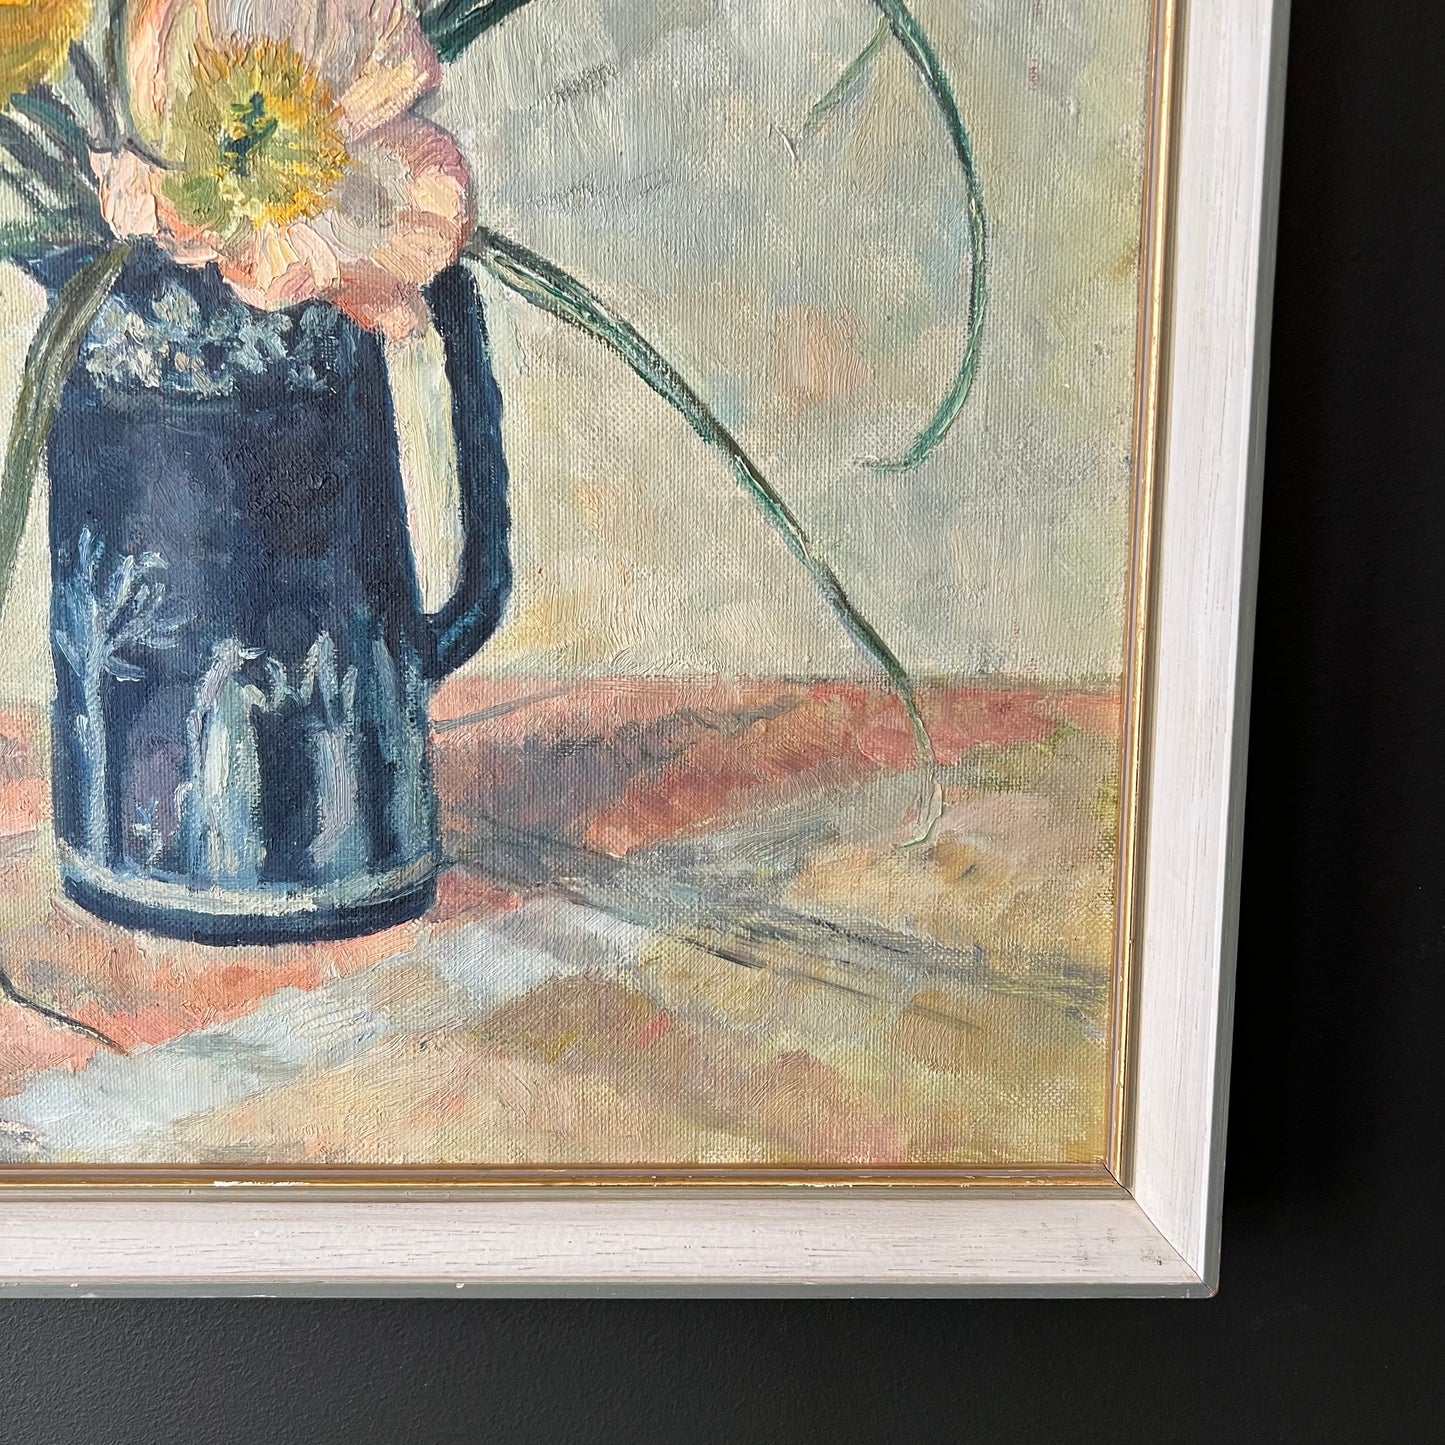 Vintage Oil Painting Still Life Pretty Poppies in Jug